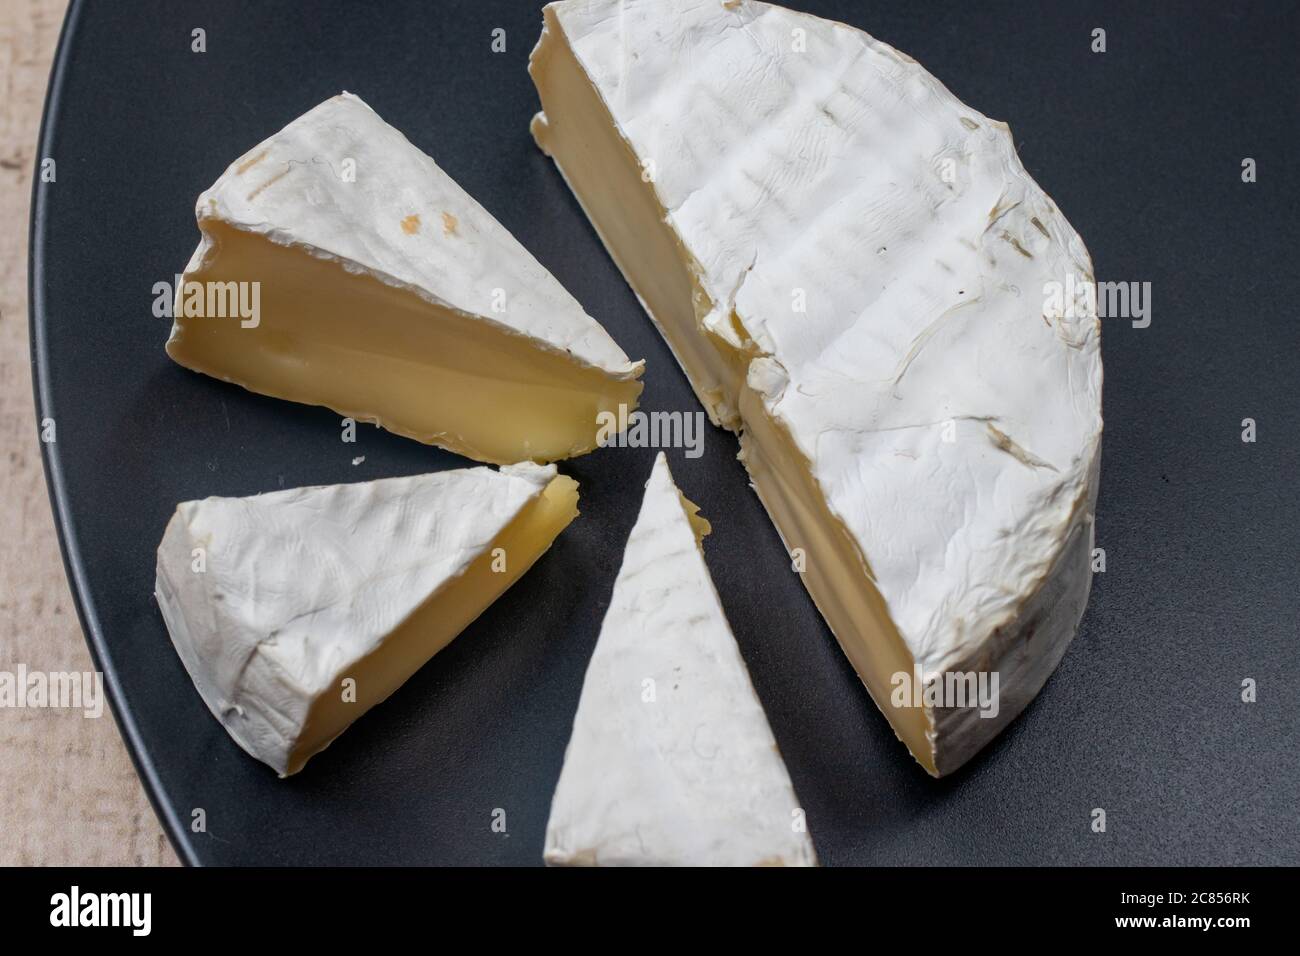 Camembert cheese is a soft elite French cheese with a crust of white mold. Made from cow's milk. Stock Photo